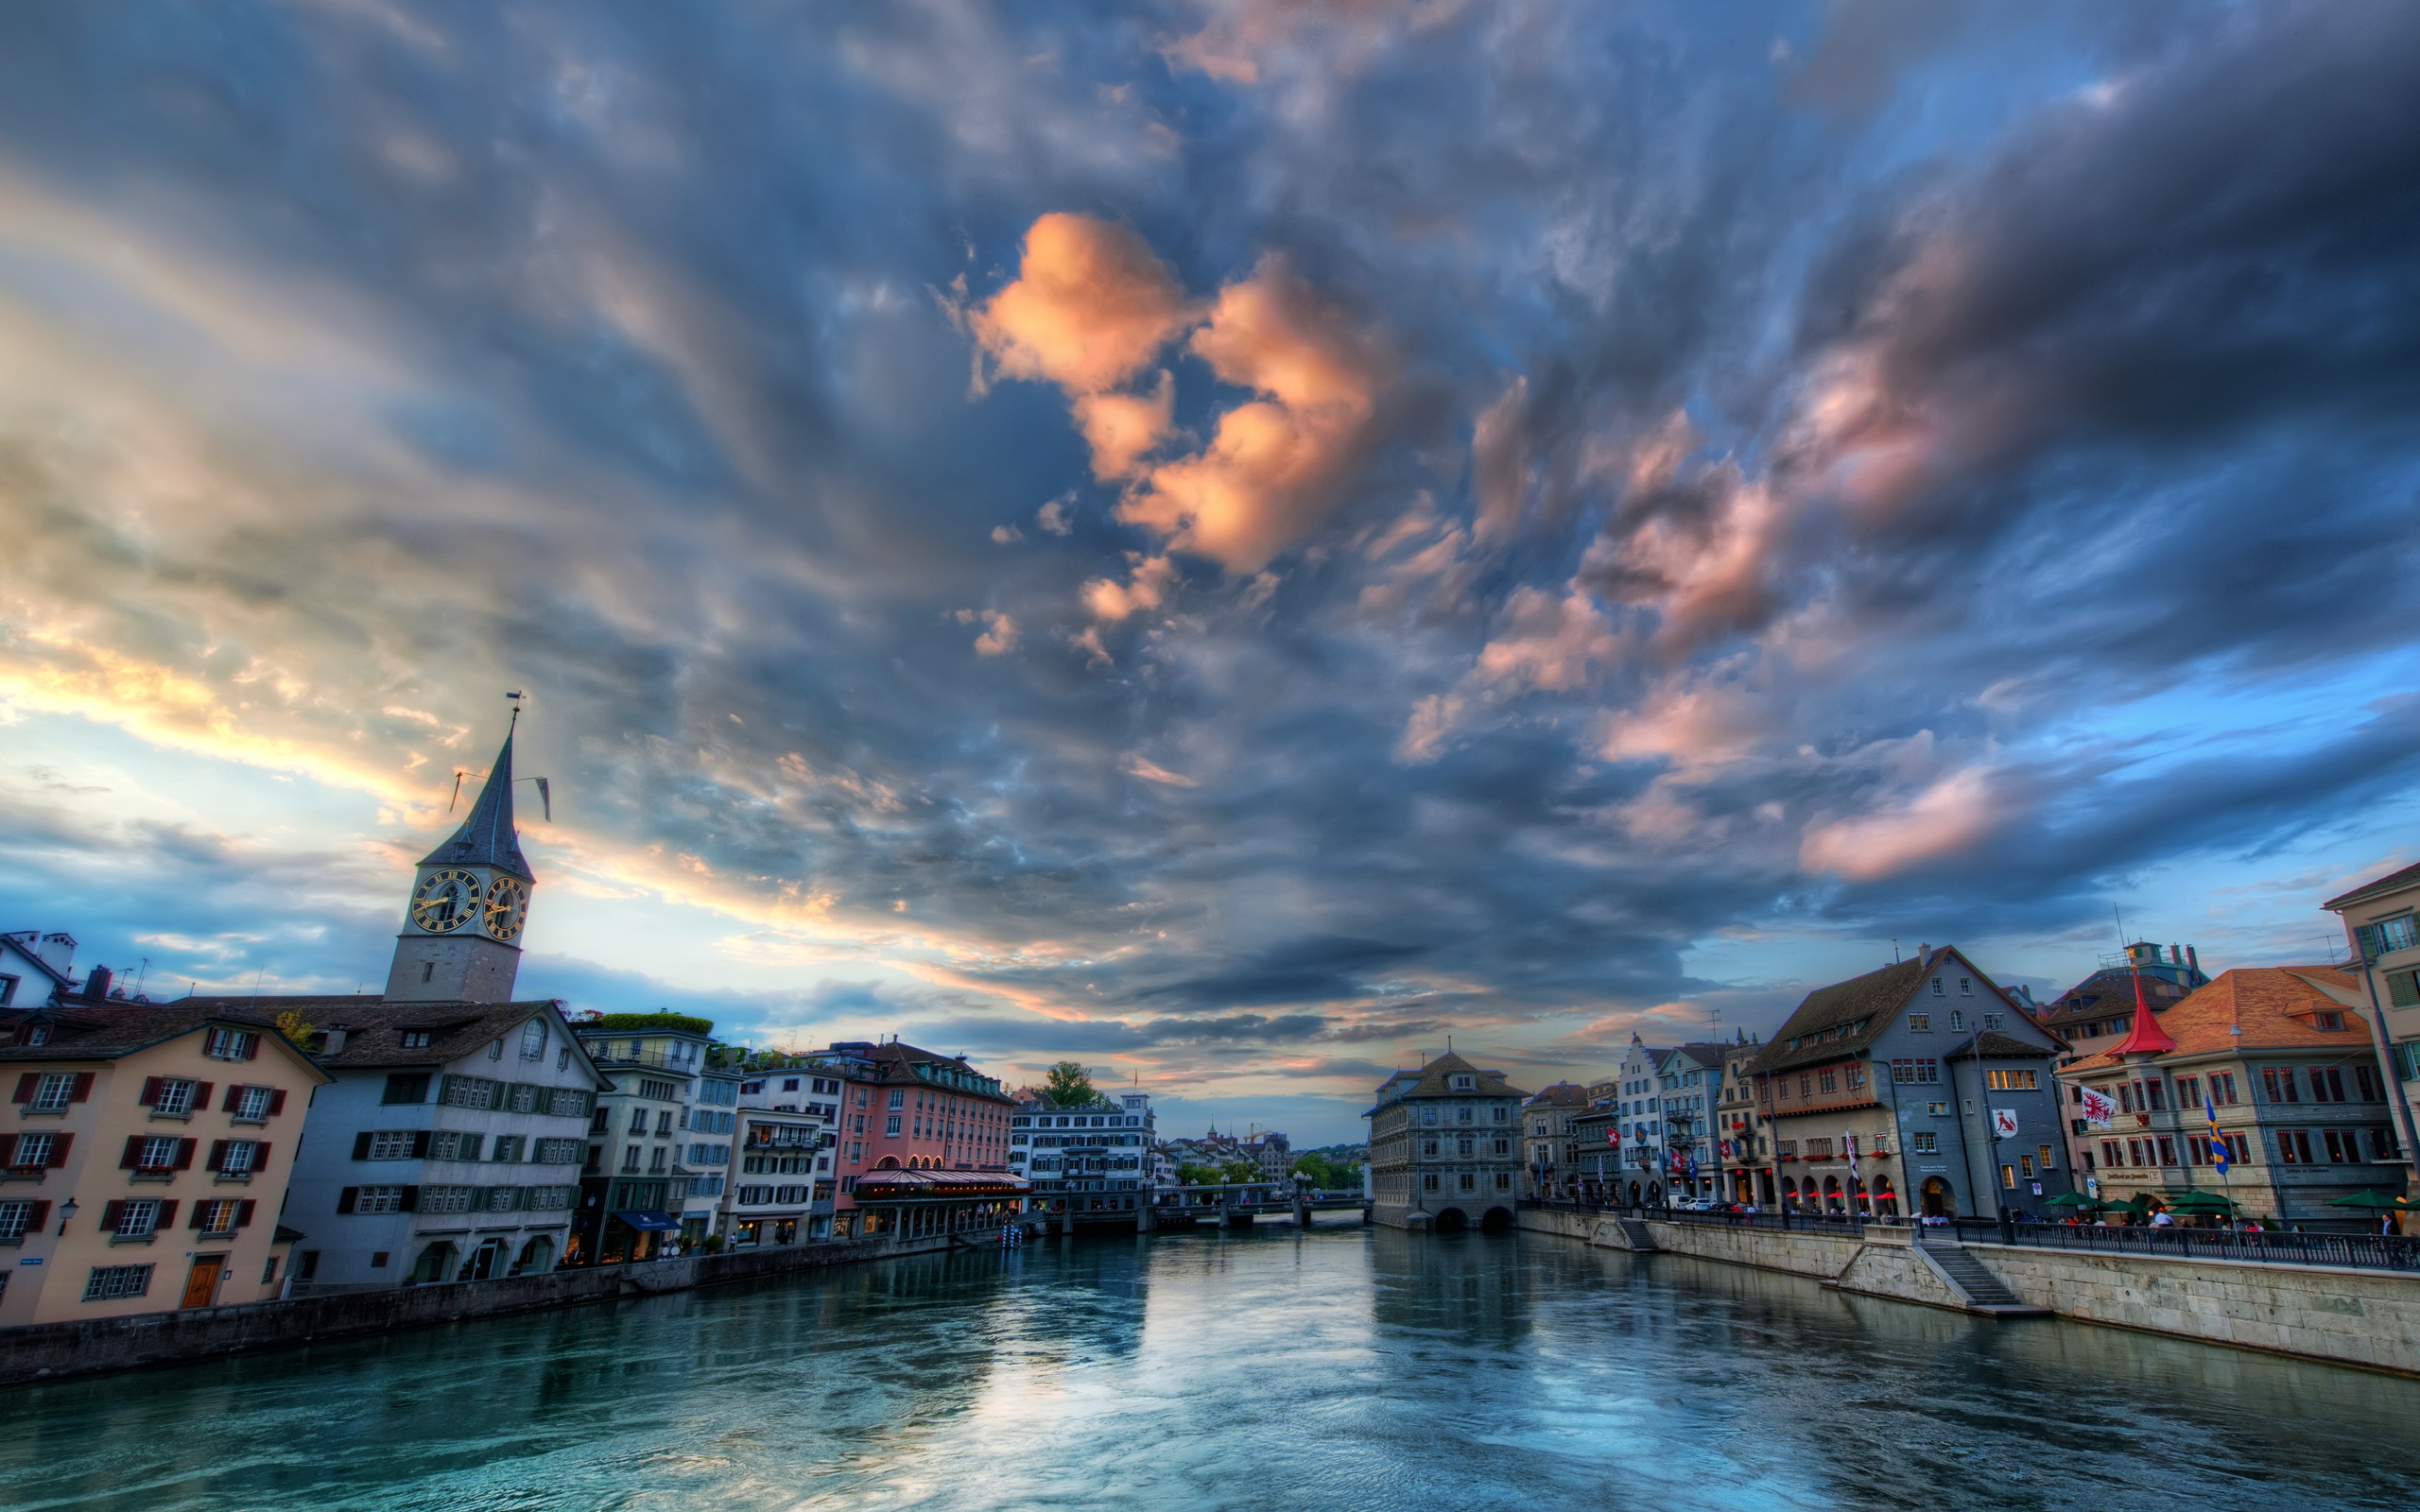 switzerland, man made, zurich, building, city, hdr, river, town, cities